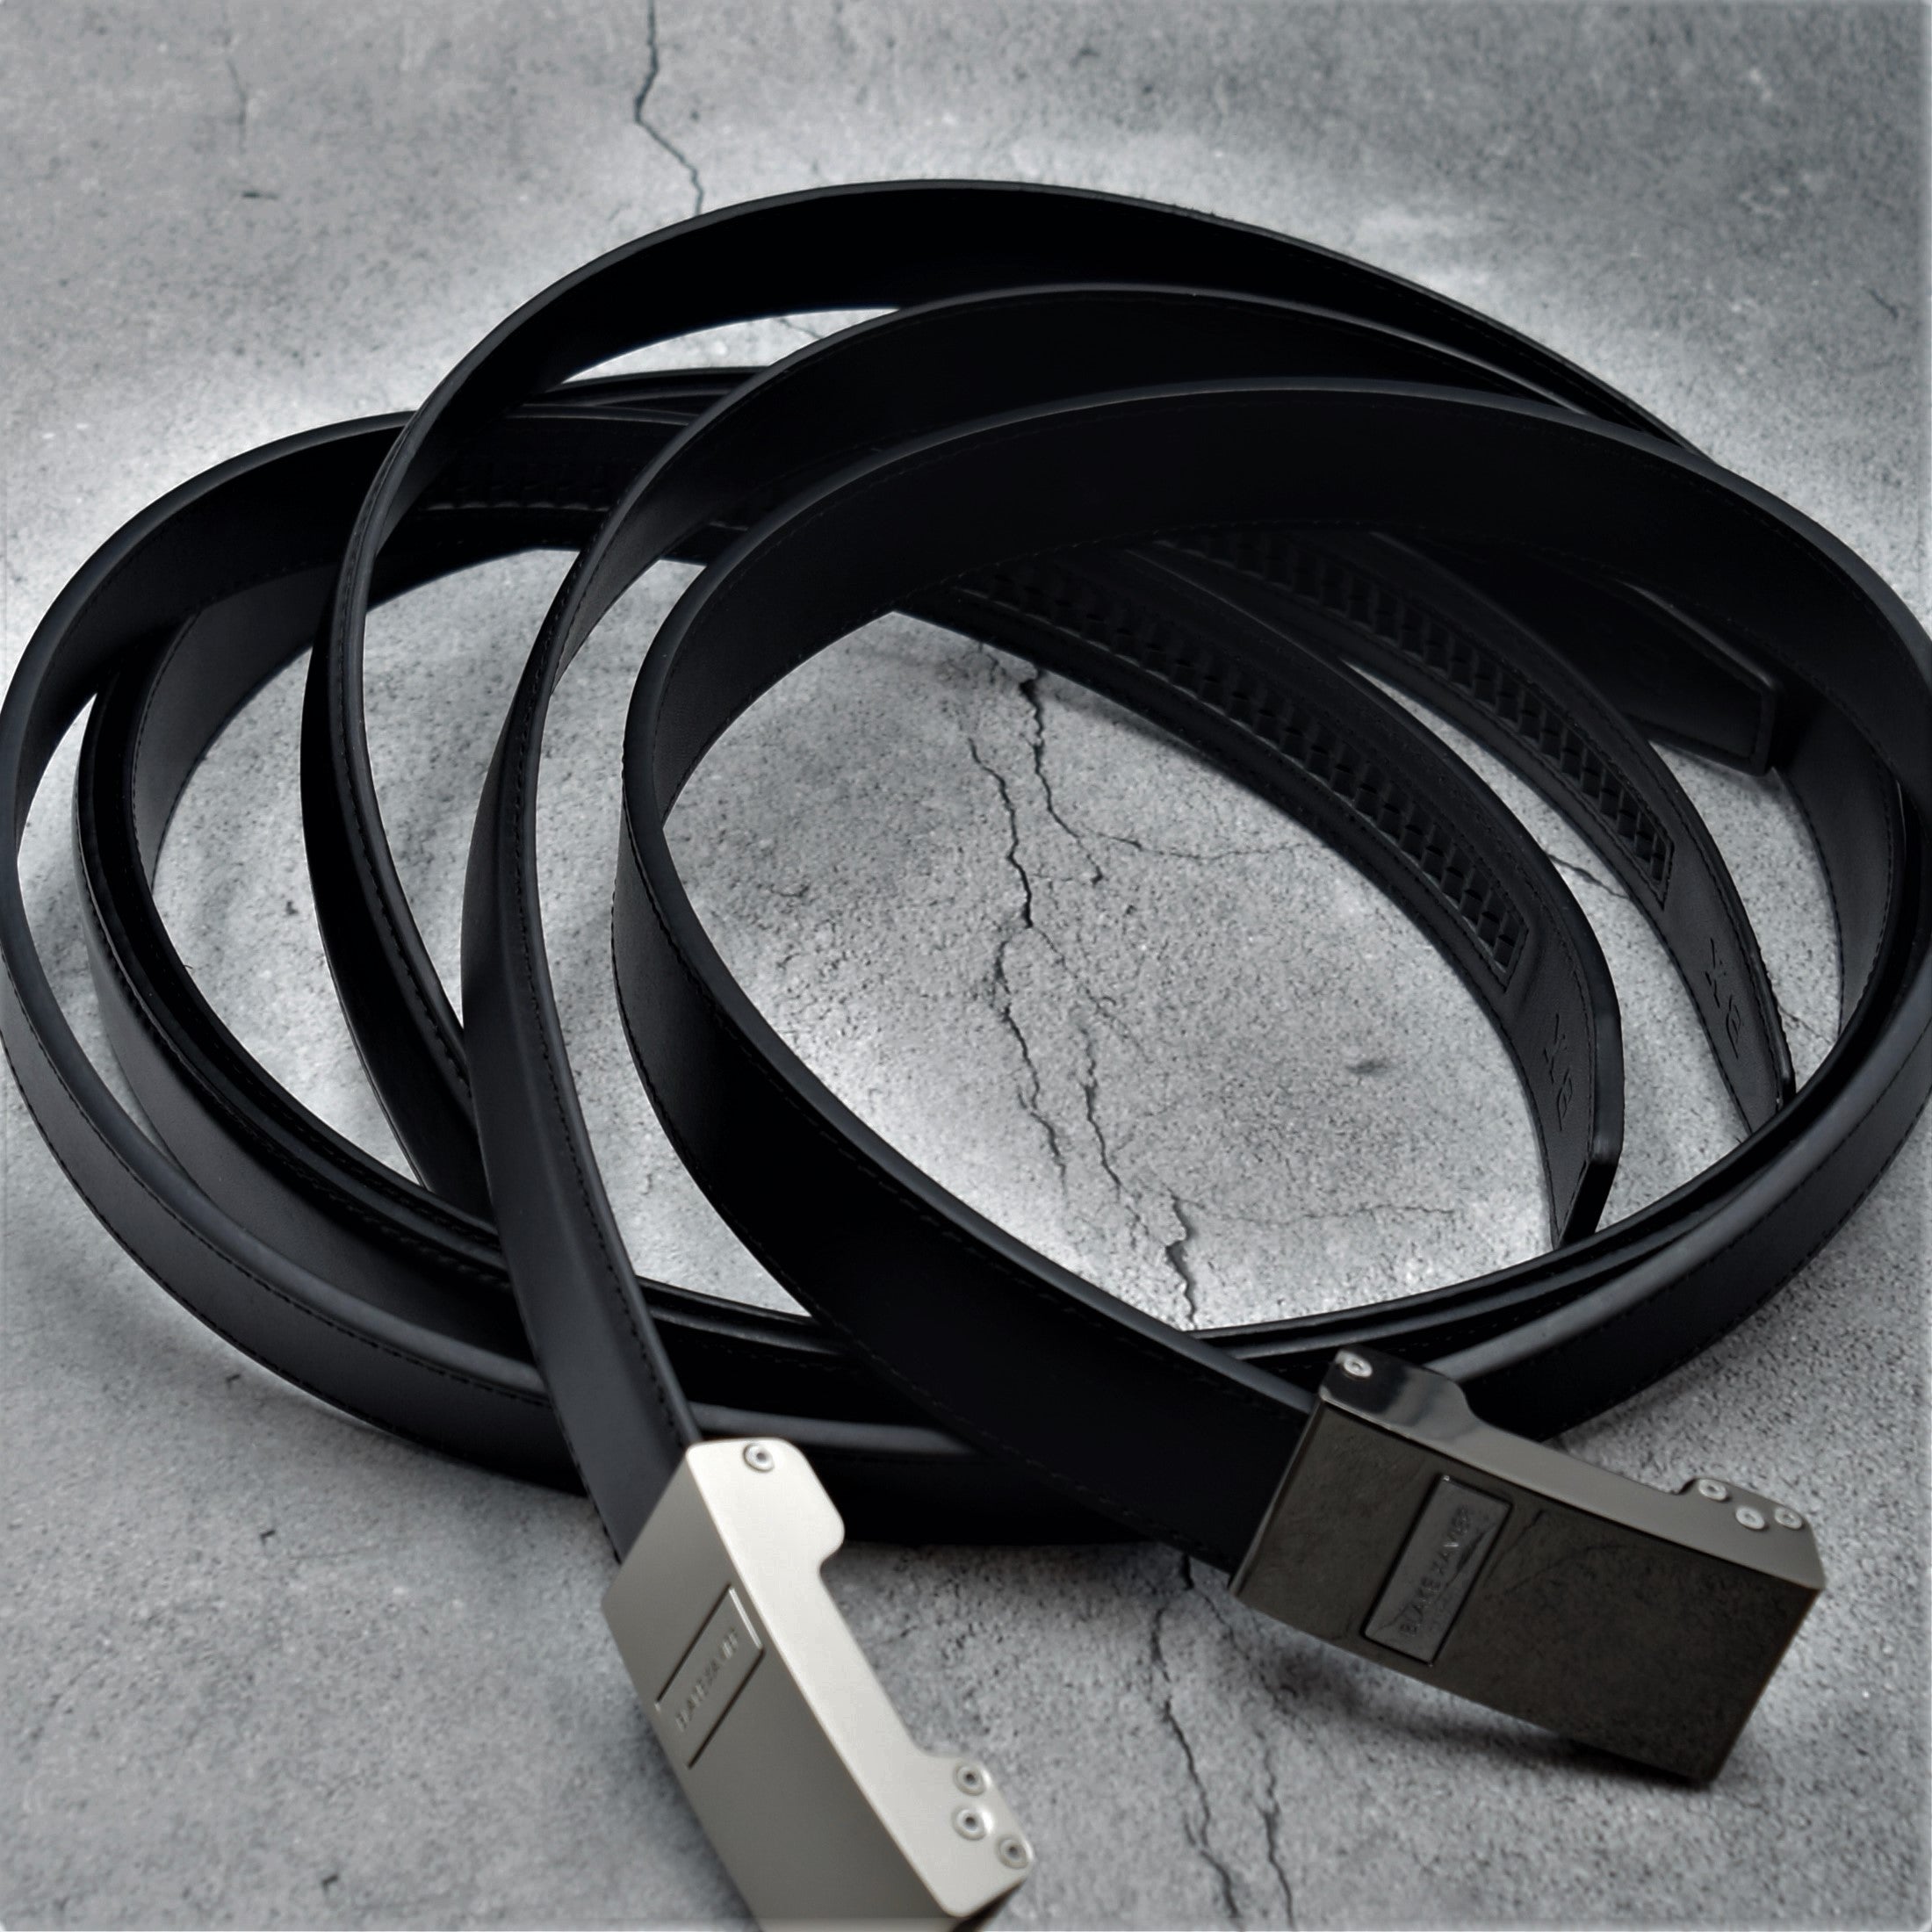 ULTIMATE – Belts] EXPERT [Black Belt The Collection The